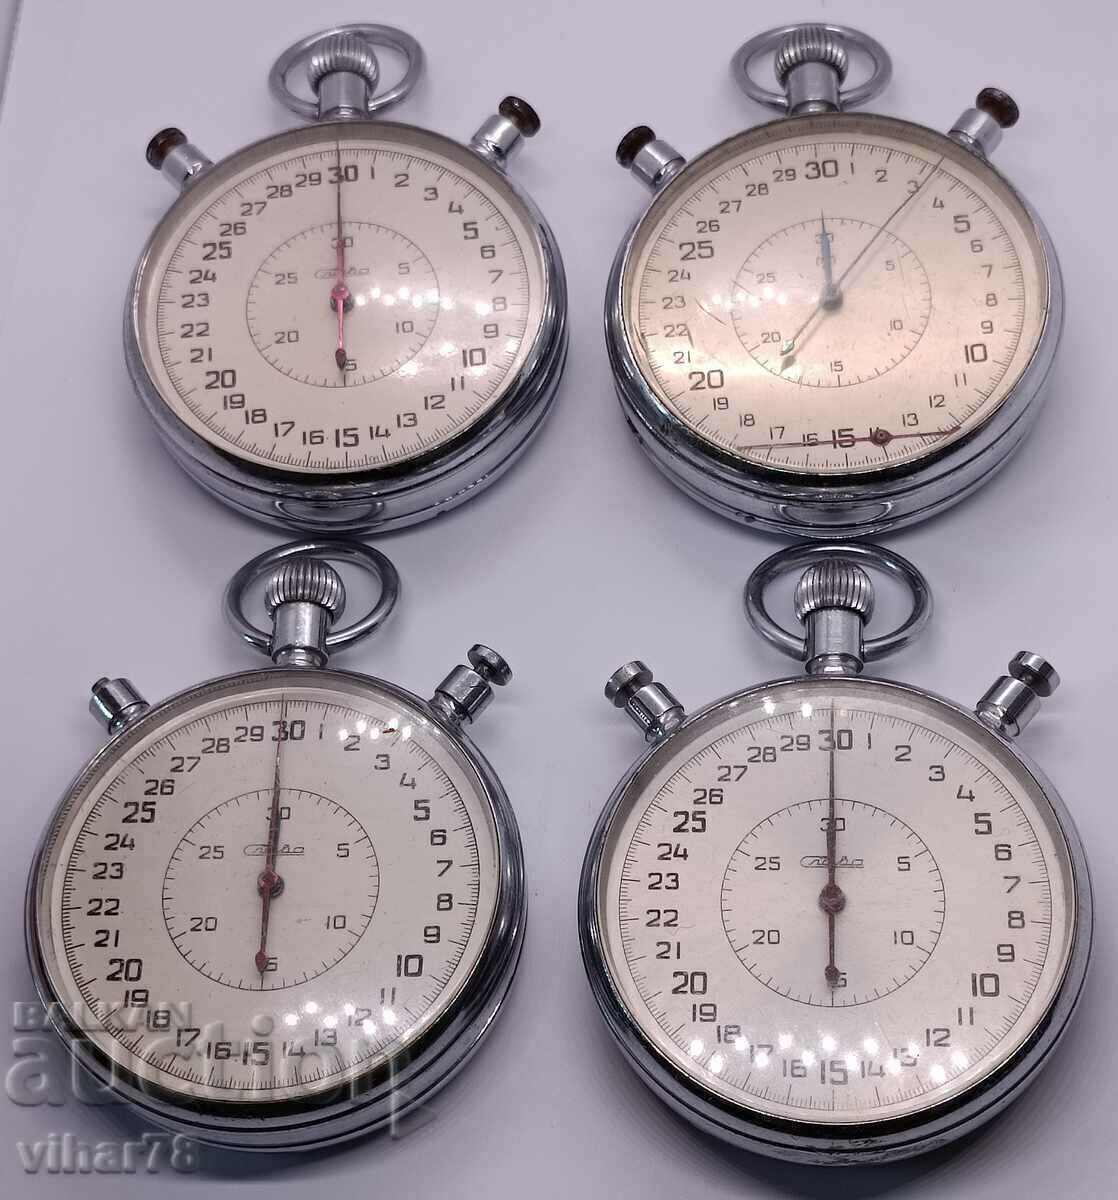 Lot of 4 Slava chronometers - do not work for repair or re